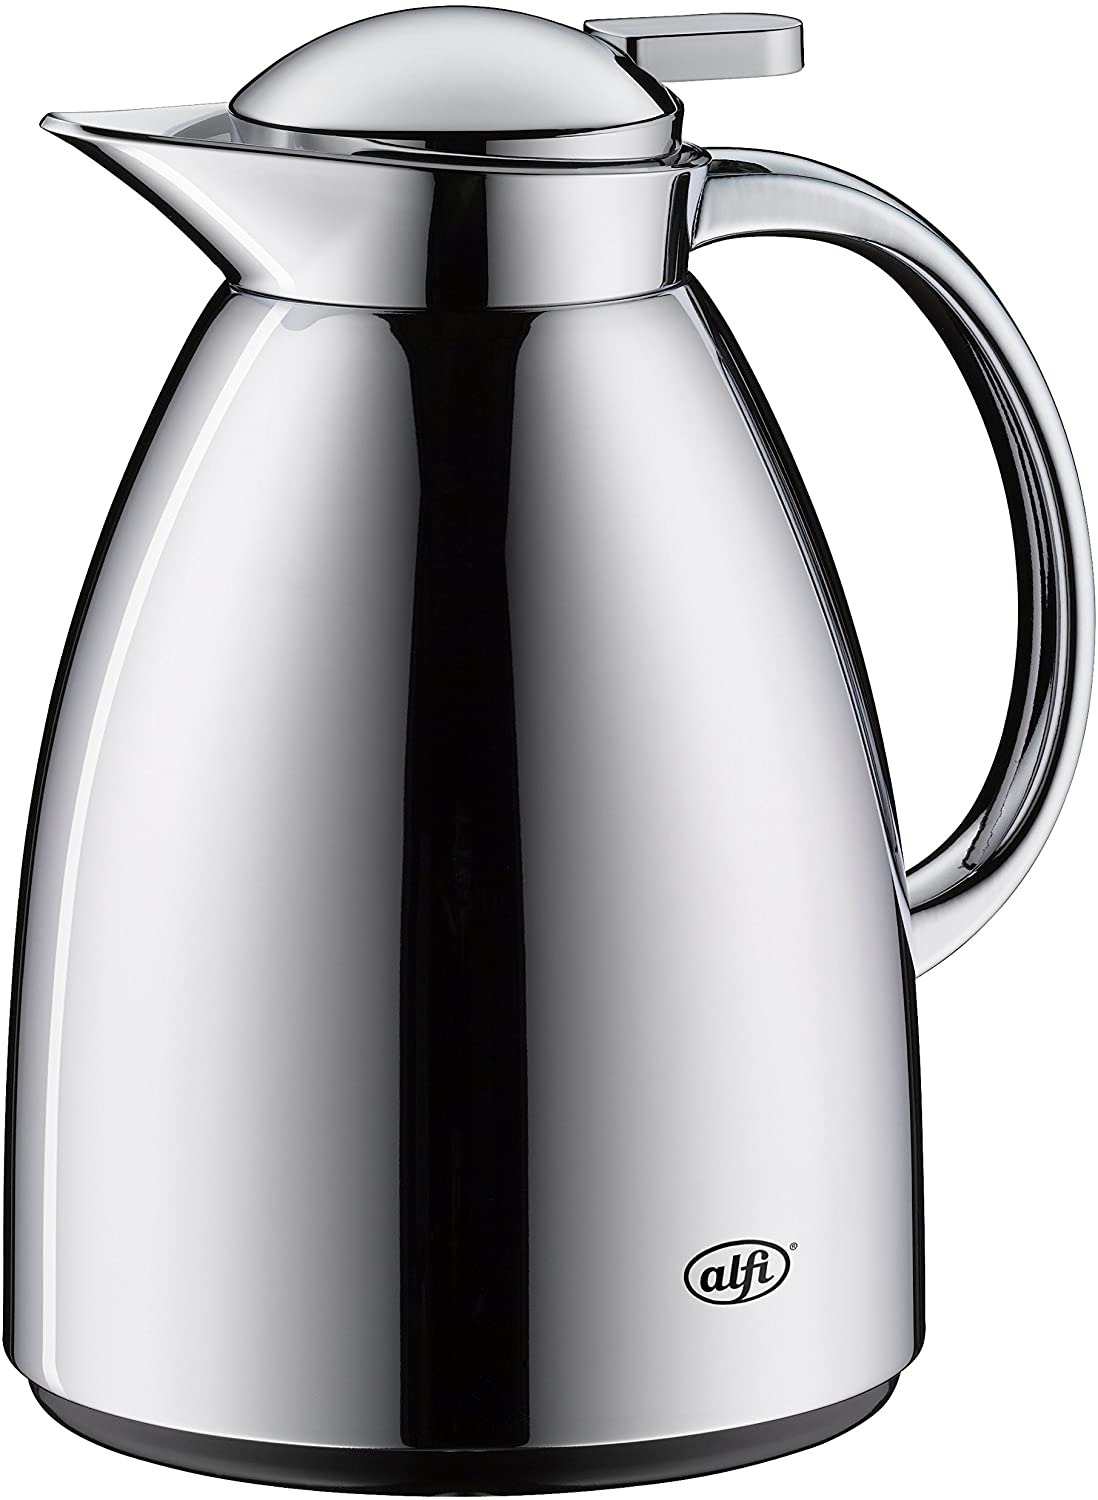 alfi Alegro 1507.000.100 Insulated Jug 1.0 L Polished Stainless Steel Hot for 12 Hours